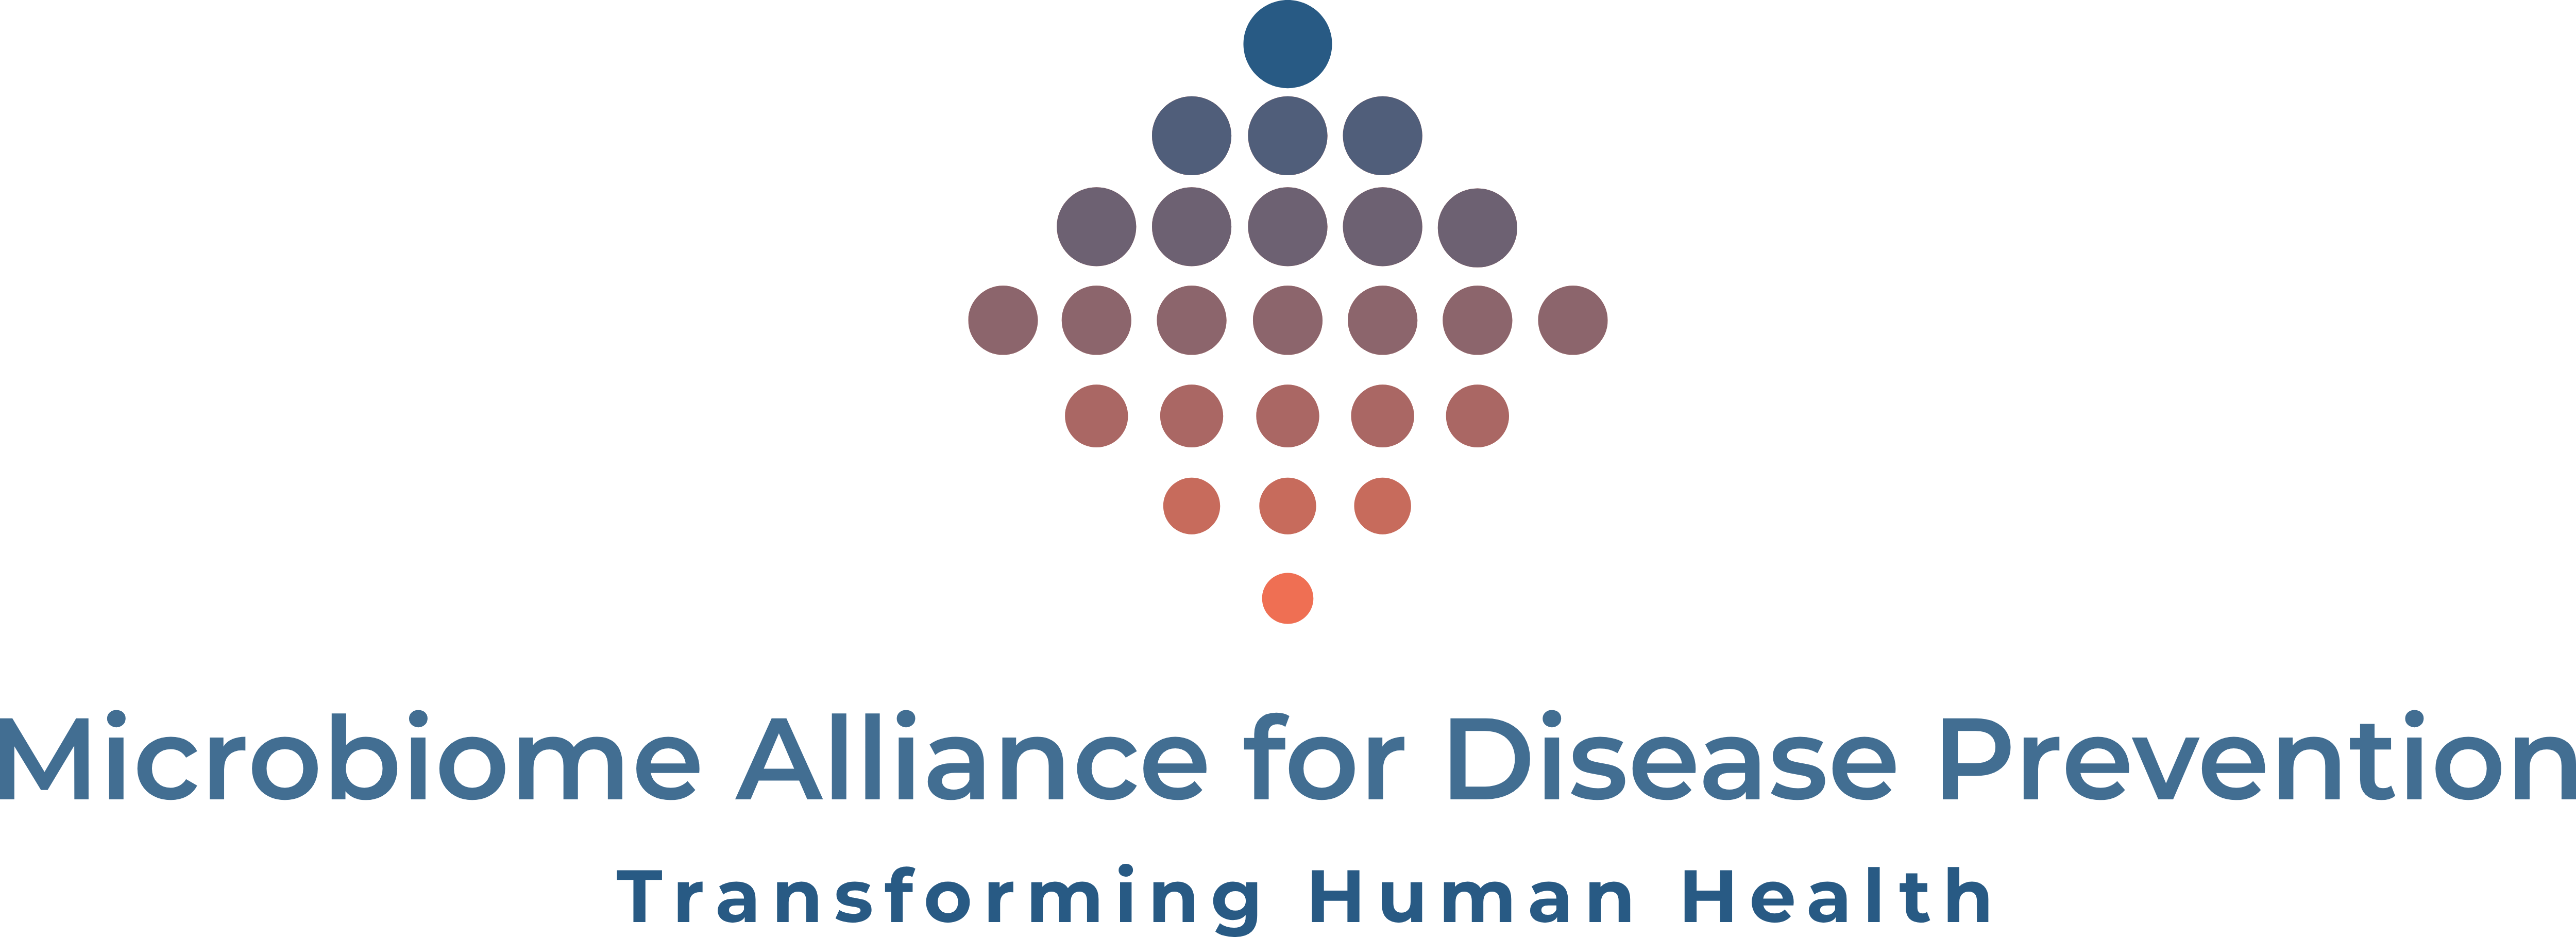 Microbiome Alliance for Disease Prevention